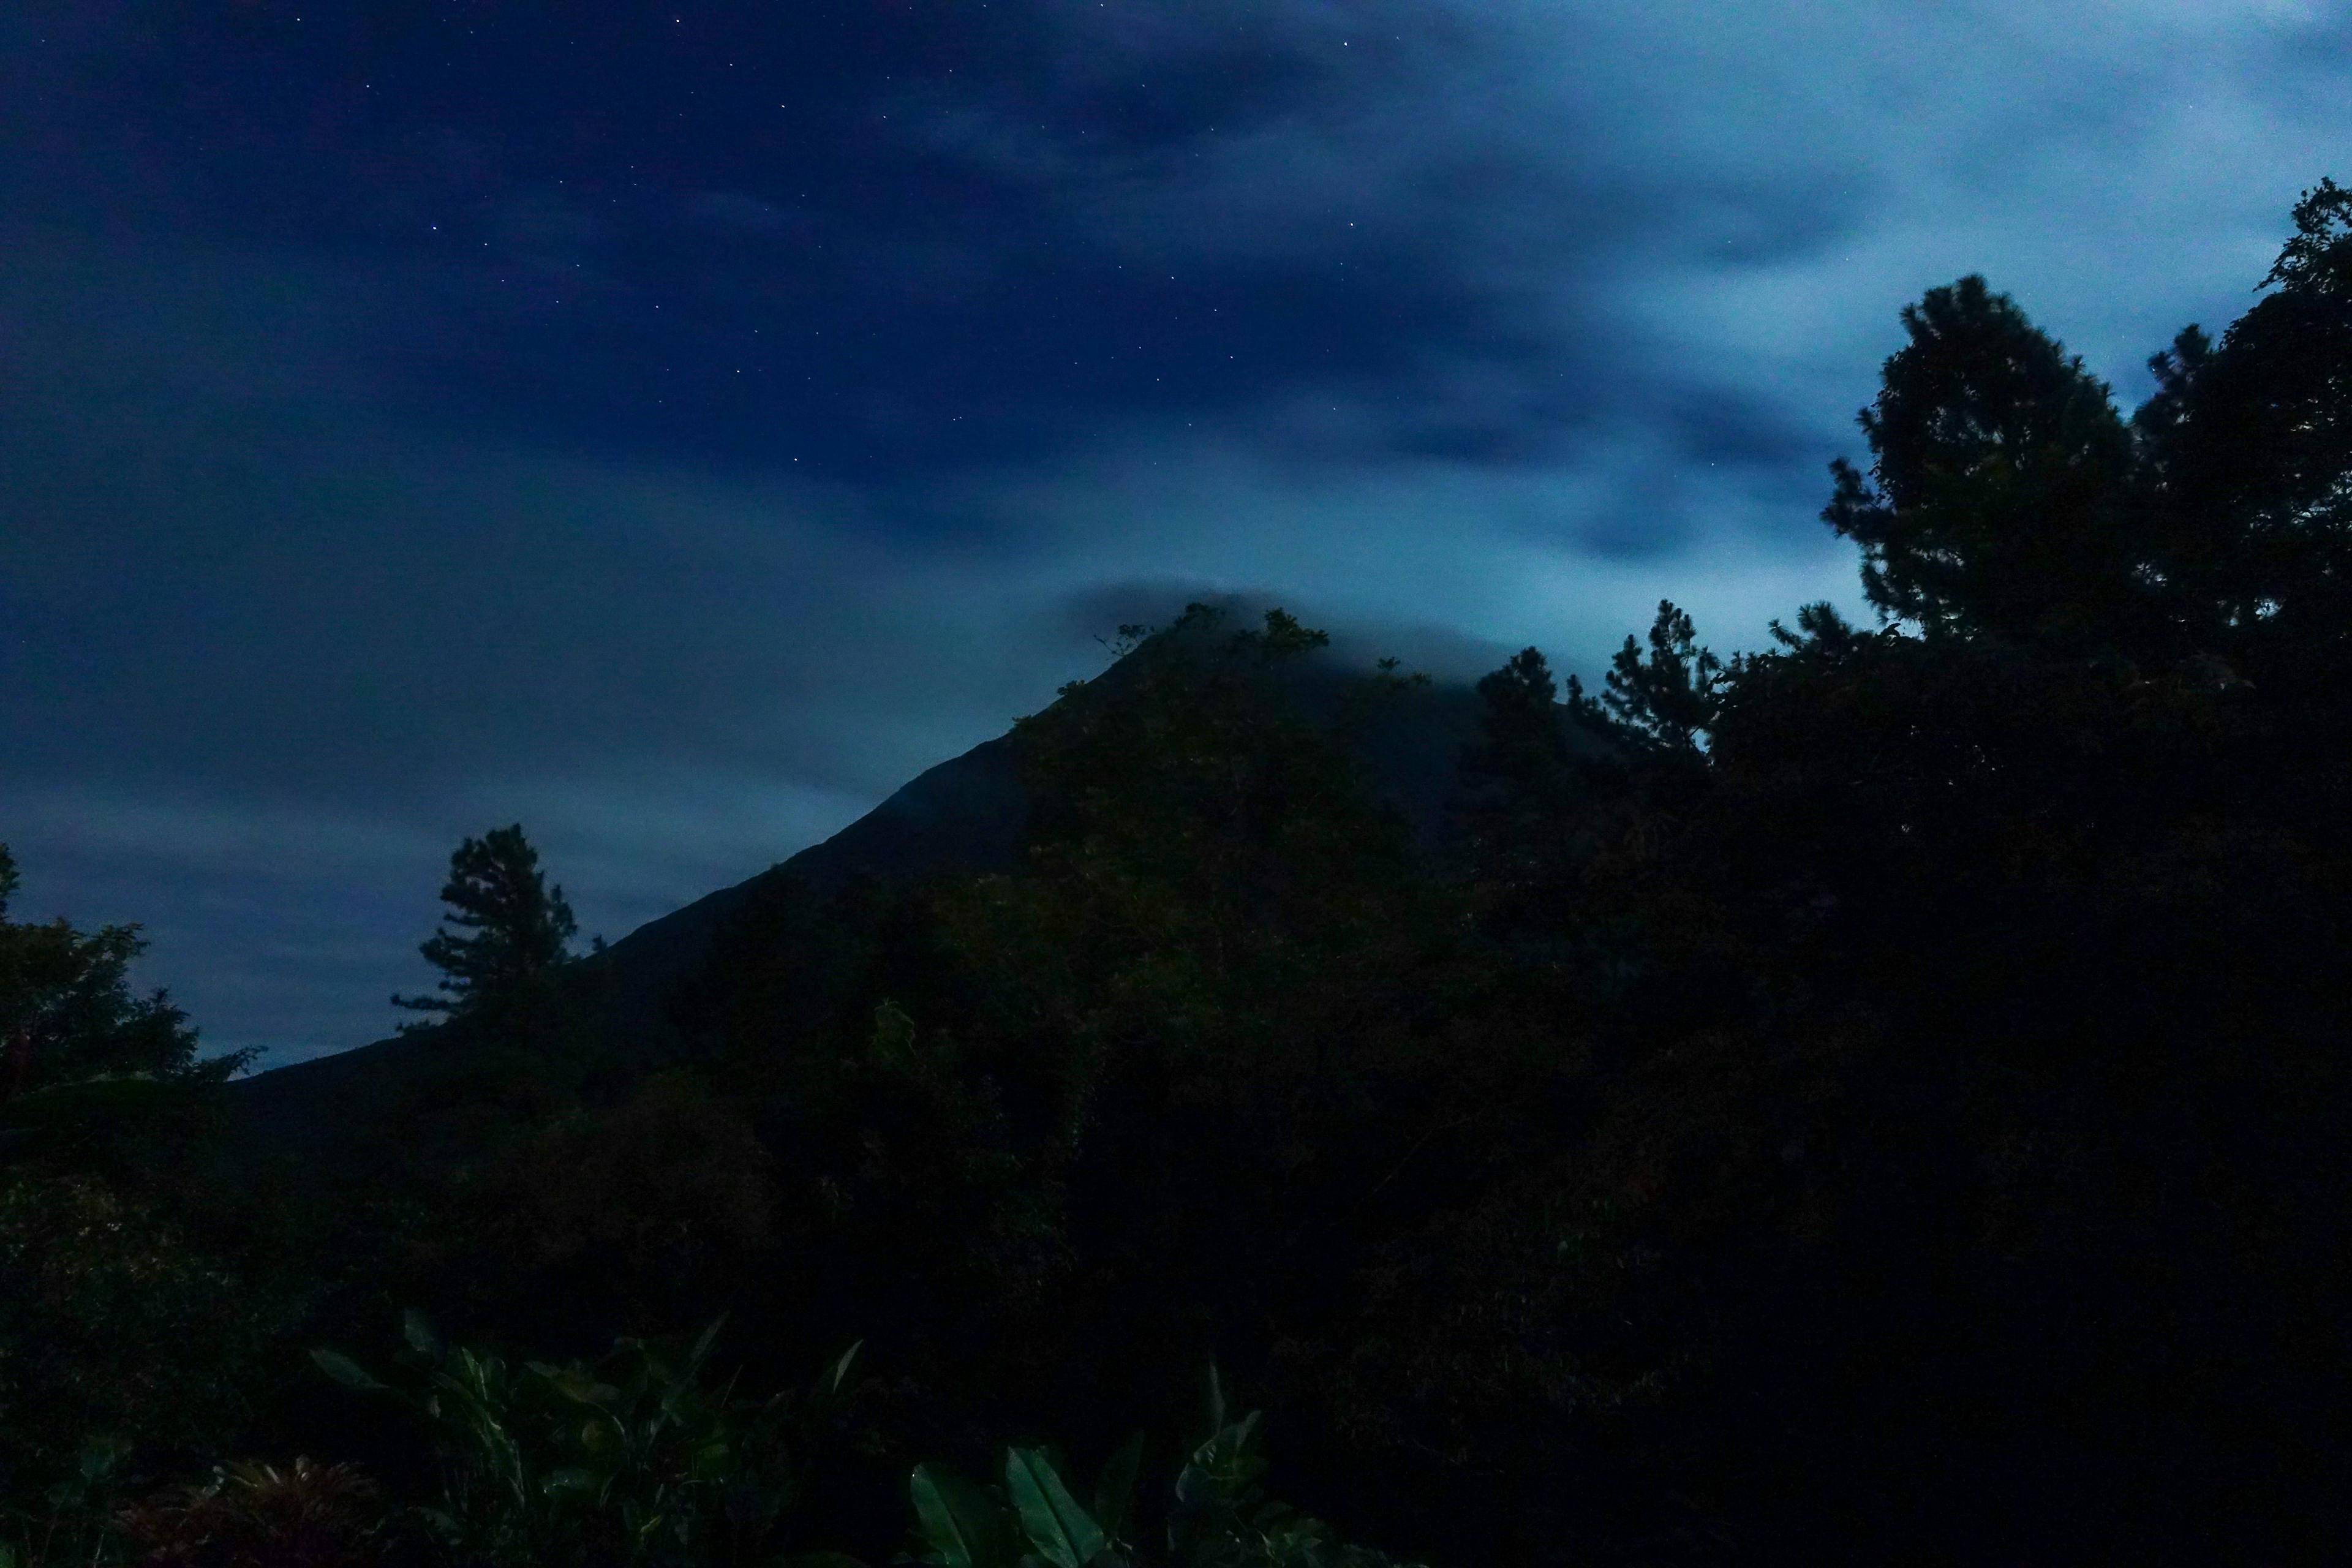 The arenal volcano at night, as seen from the hotel balcony